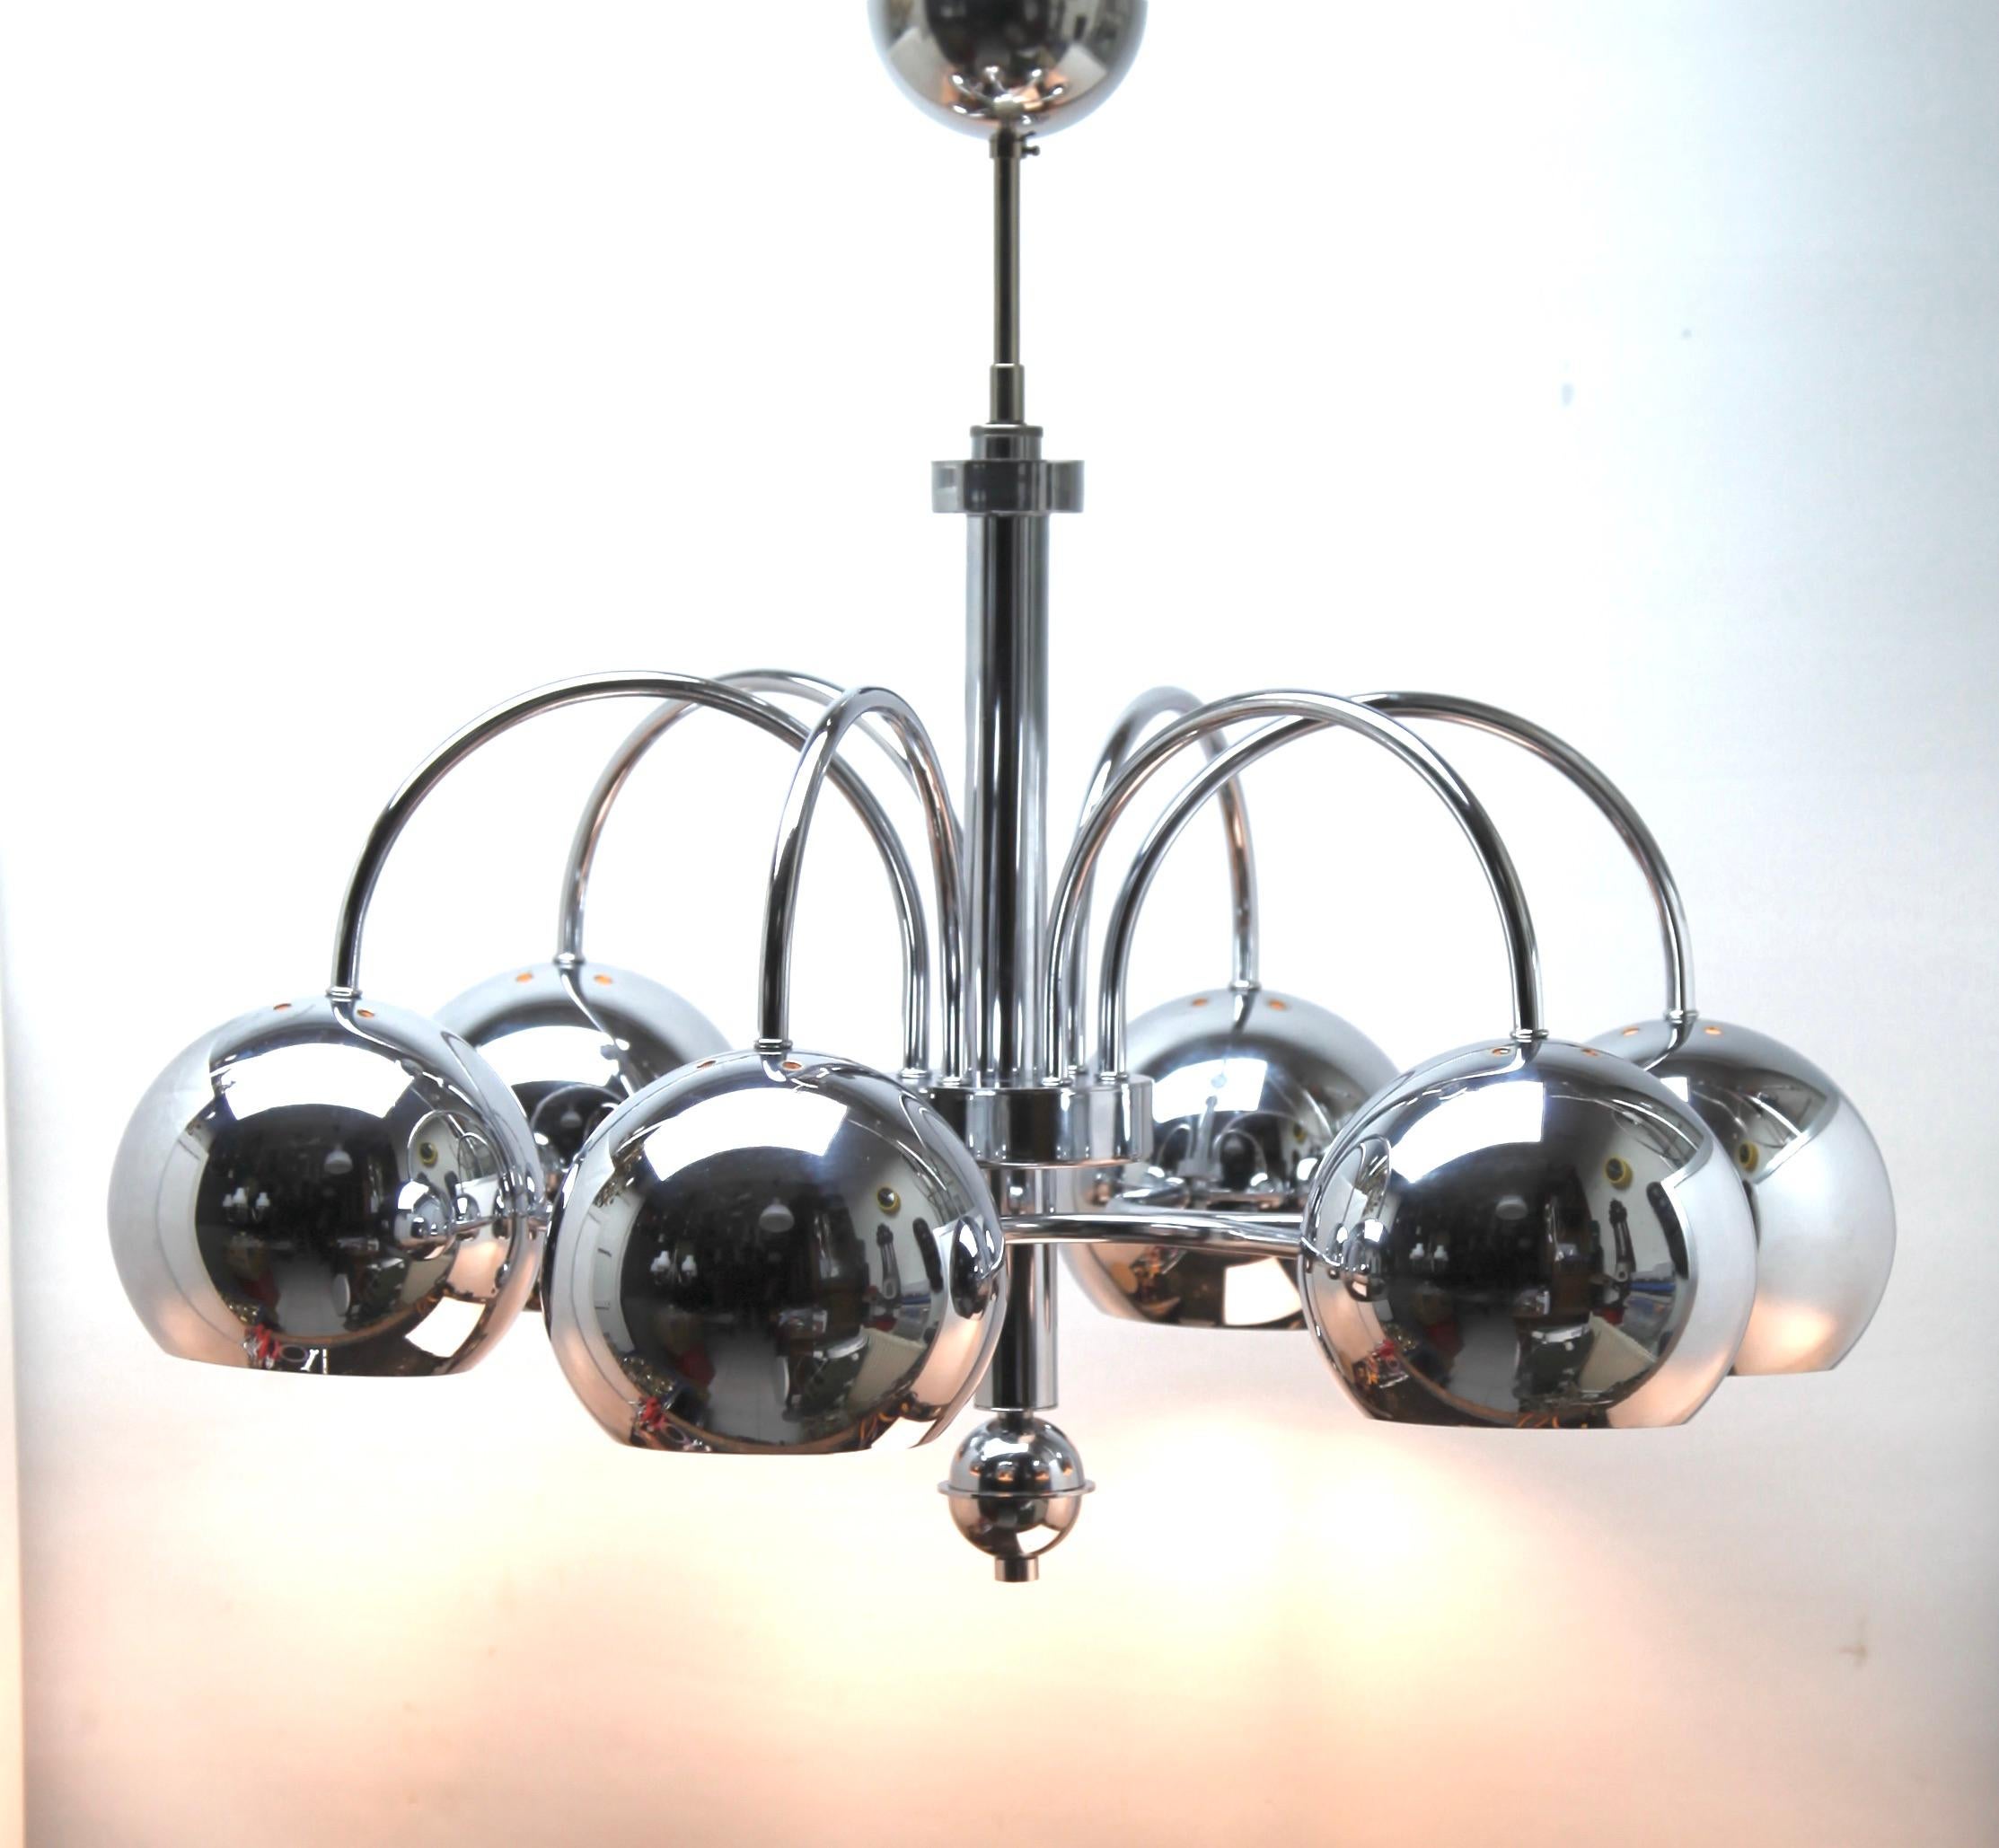 Machine-Made Ceiling Lamp with 6 Eyeball Lights Goffredo Reggiani, 1960s For Sale